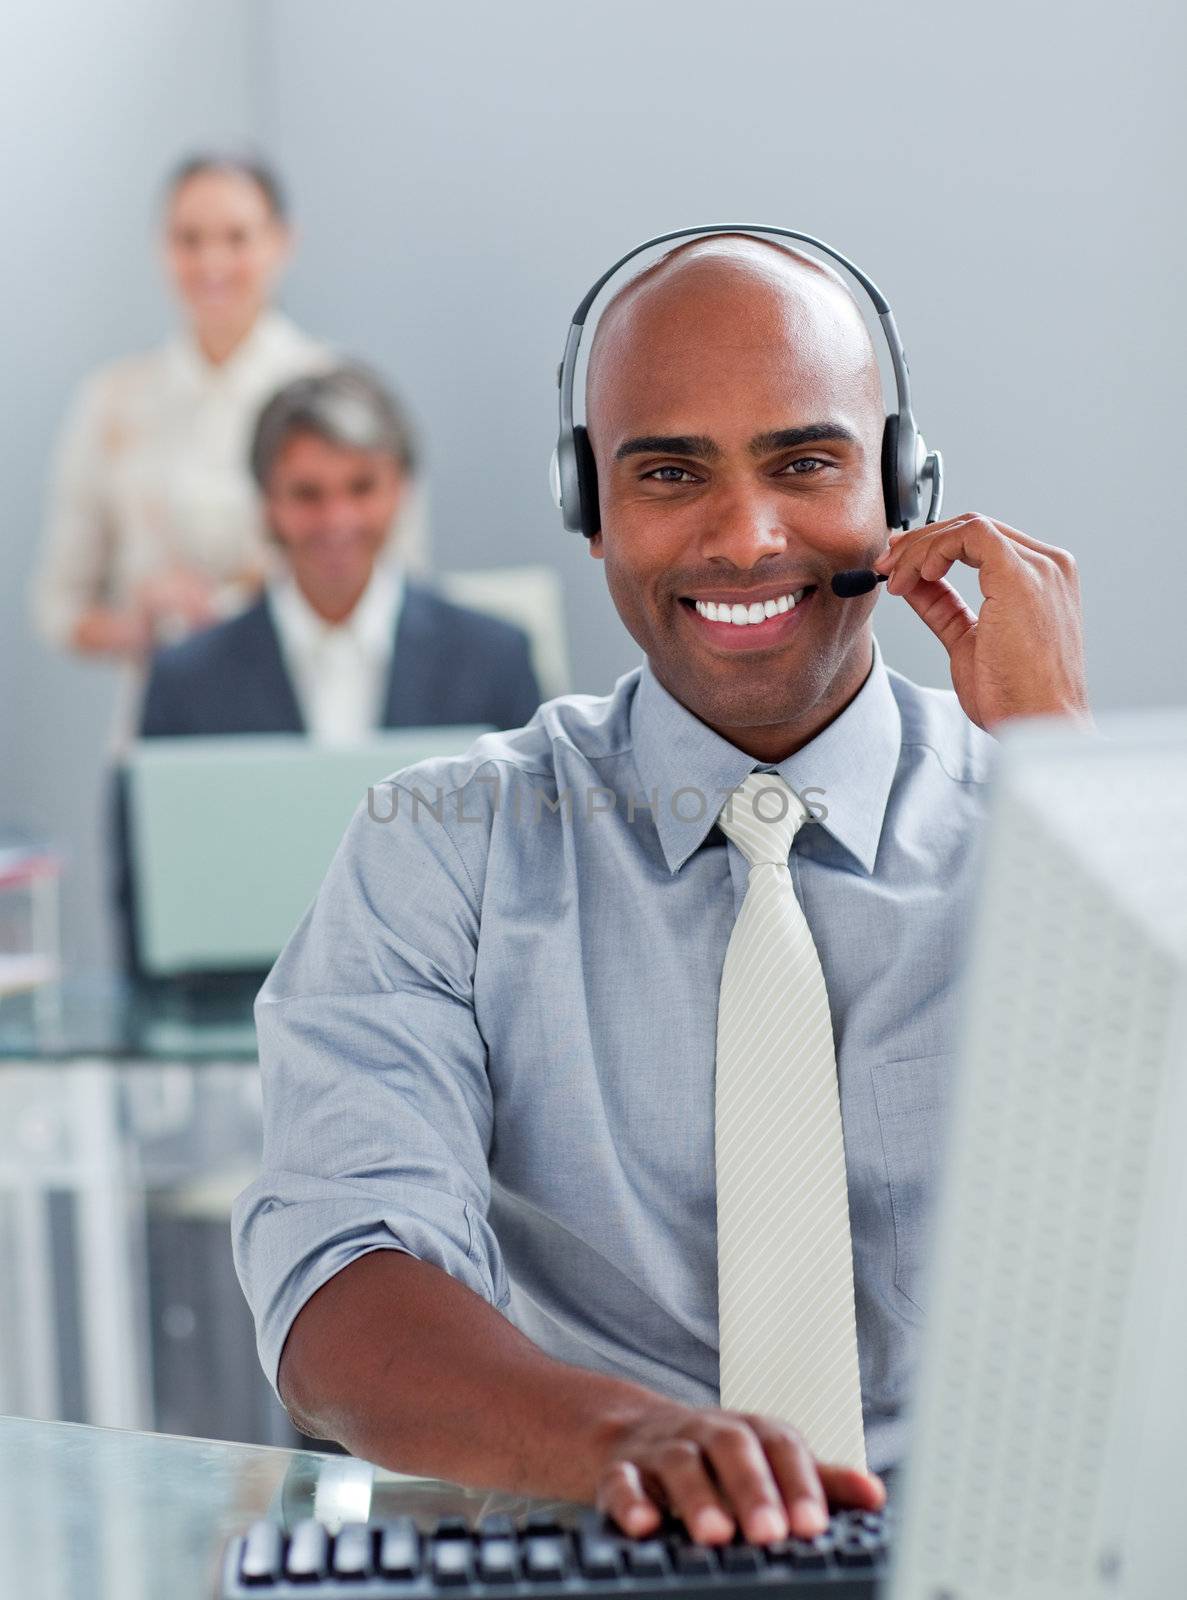 Ethnic businessman working at a computer with headset on by Wavebreakmedia